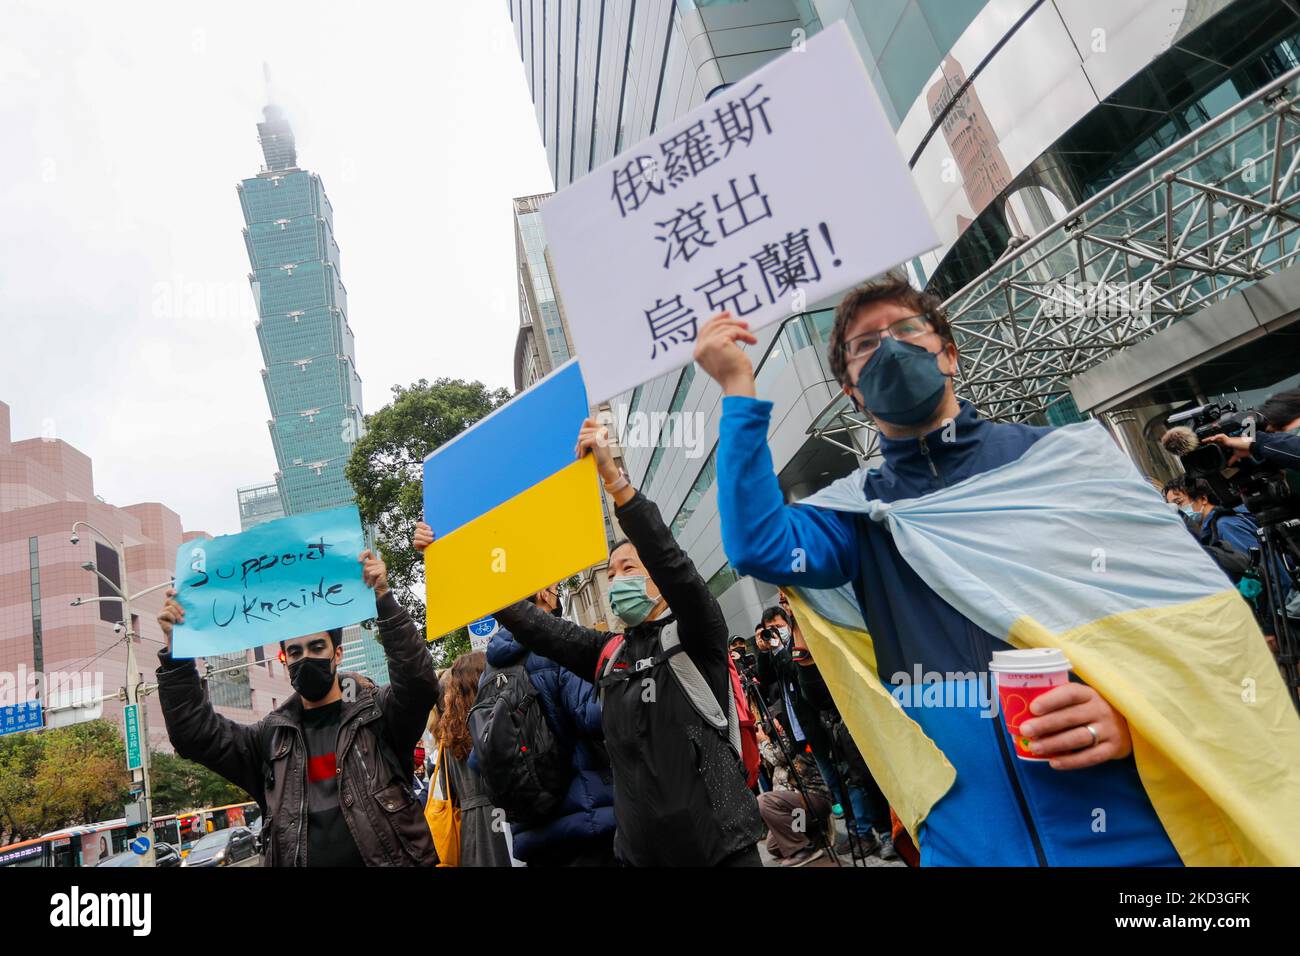 Demonstrators holding placards that read ‘We are all Ukrainians today’, and national flags of Ukraine, during a protest against Russian live-fire attacks on Ukraine, outside the Moscow-Taipei Coordination Commission in Taiwan, in Taipei, Taiwan, 25 February 2022. Several western countries including the US and UK have imposed sanctions on Russia, with Baltic states members including Lithuania and Estonia showing support of Ukraine. (Photo by Ceng Shou Yi/NurPhoto) Stock Photo